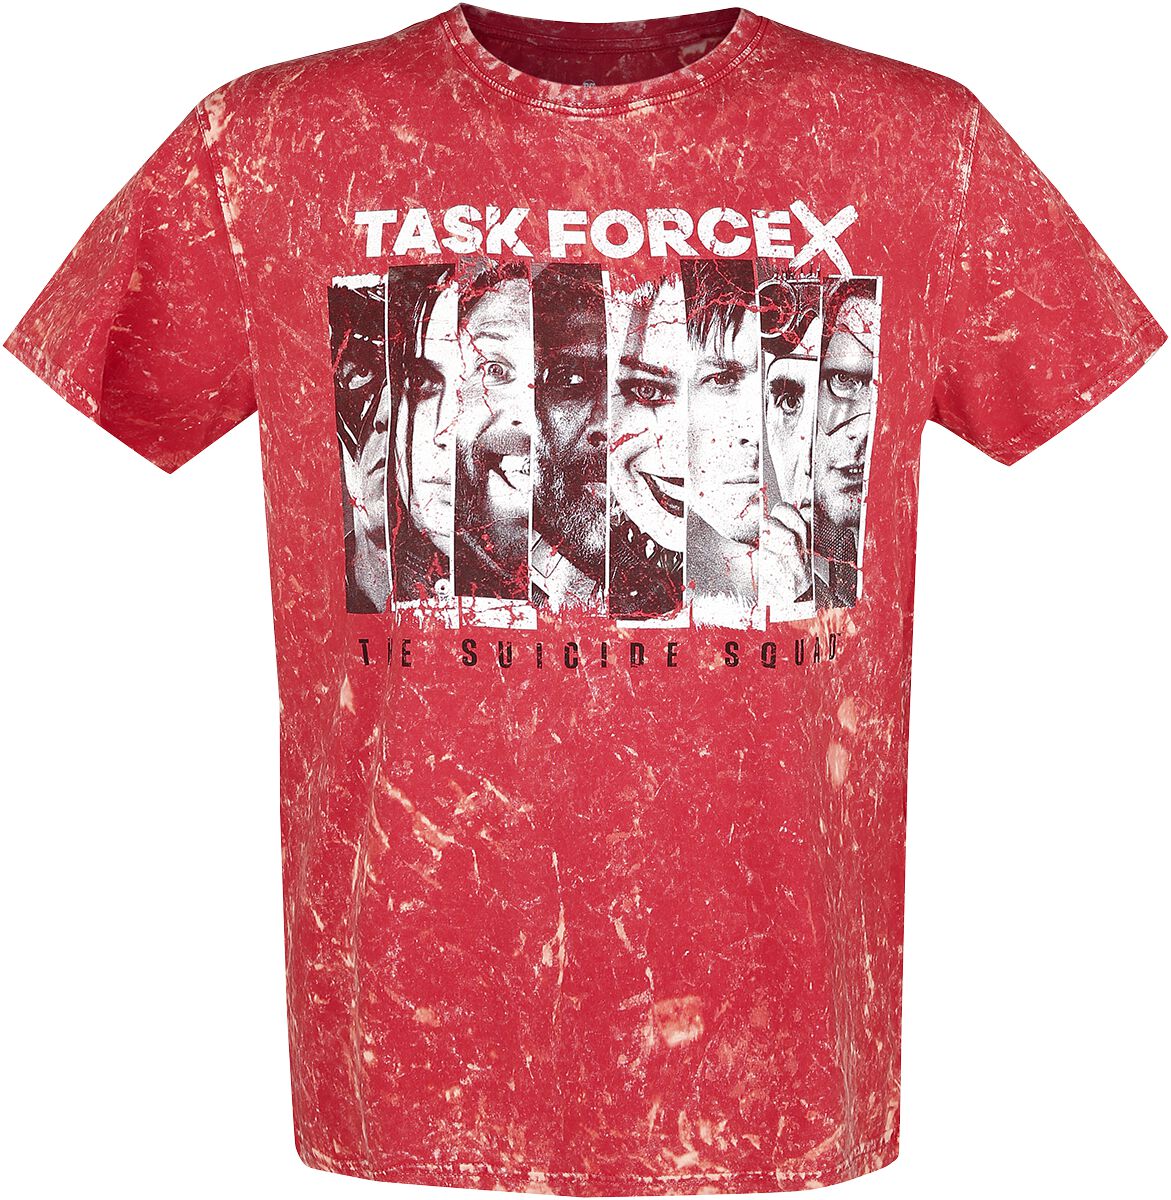 Suicide Squad 2 - Taskforce X T-Shirt red